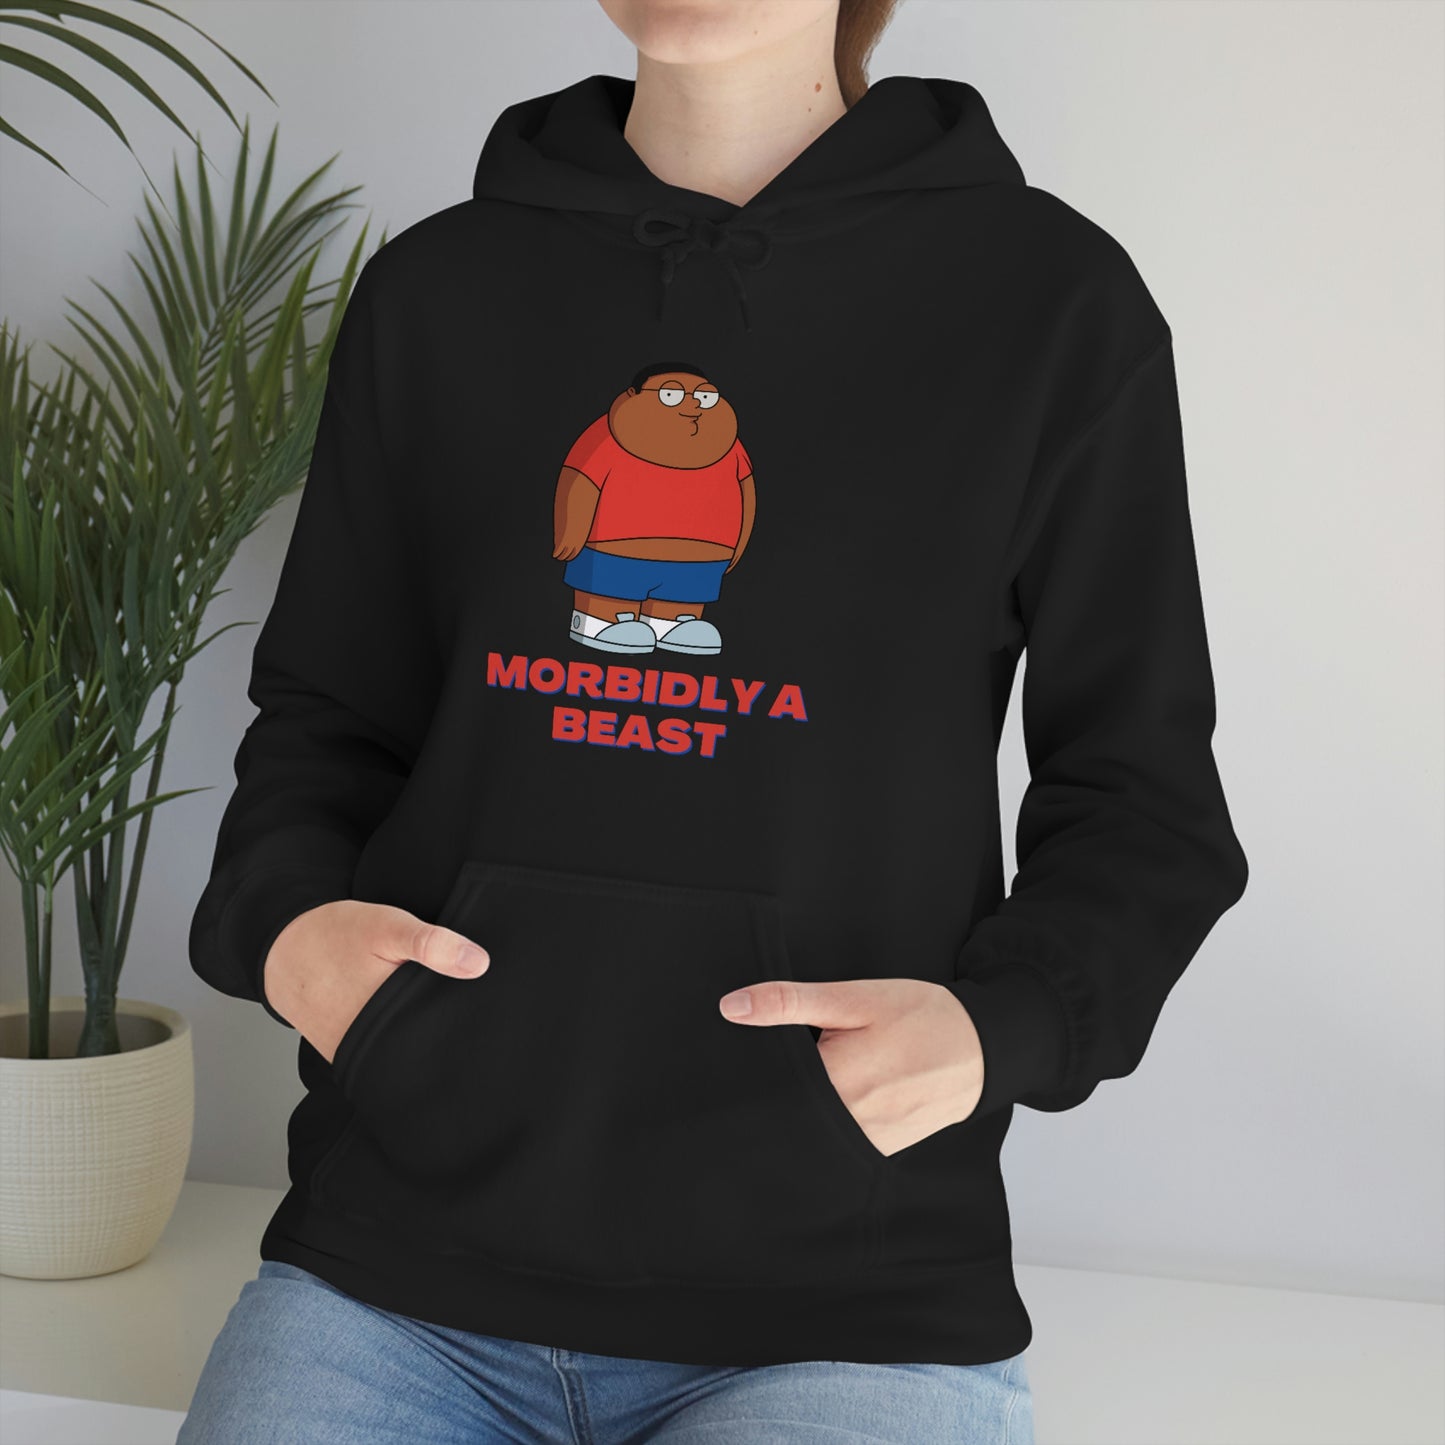 Morbidly a Beast - Unisex Heavy Blend™ Hooded Sweatshirt - ALL COLORS